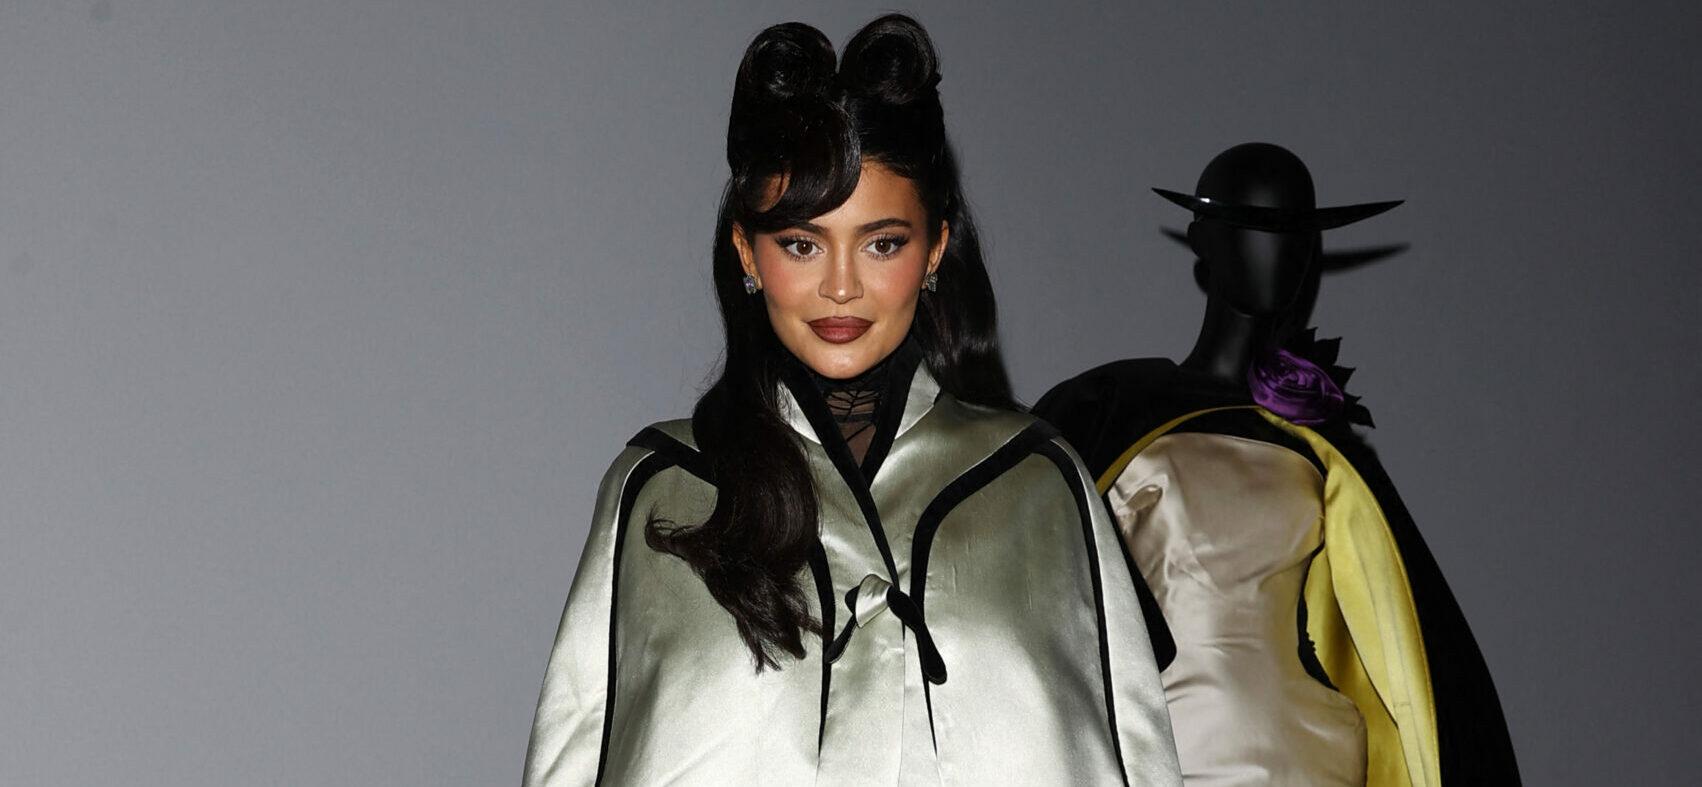 Kylie Jenner steps out to the Brooklyn Museum for the apos Mugler apos fashion exhibition in NYC